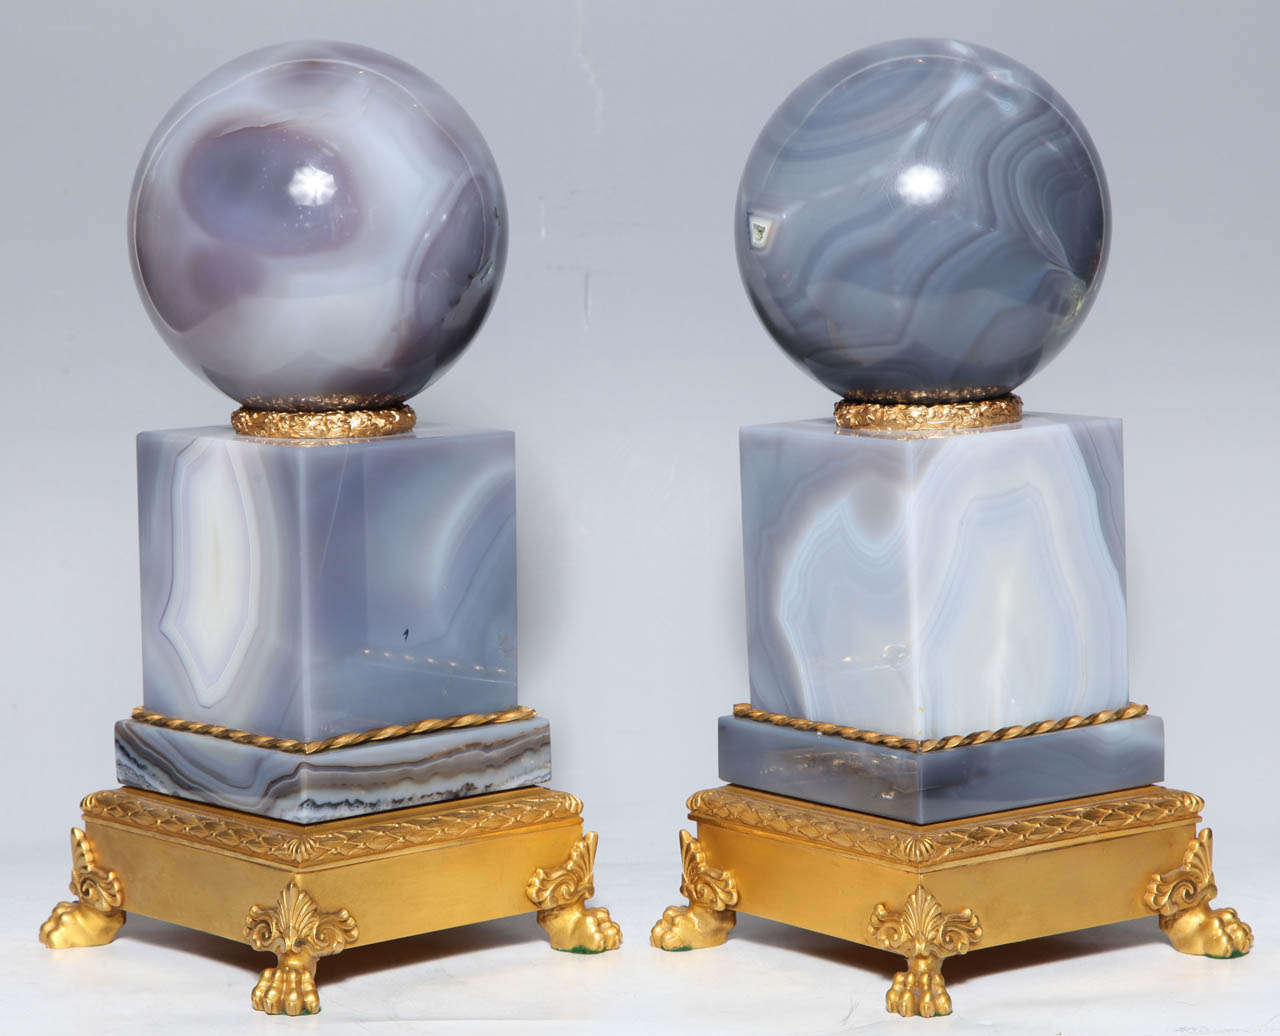 French Pair of Second Empire Style Agate Orbs on Plinths with Gilt Bronze Mounts